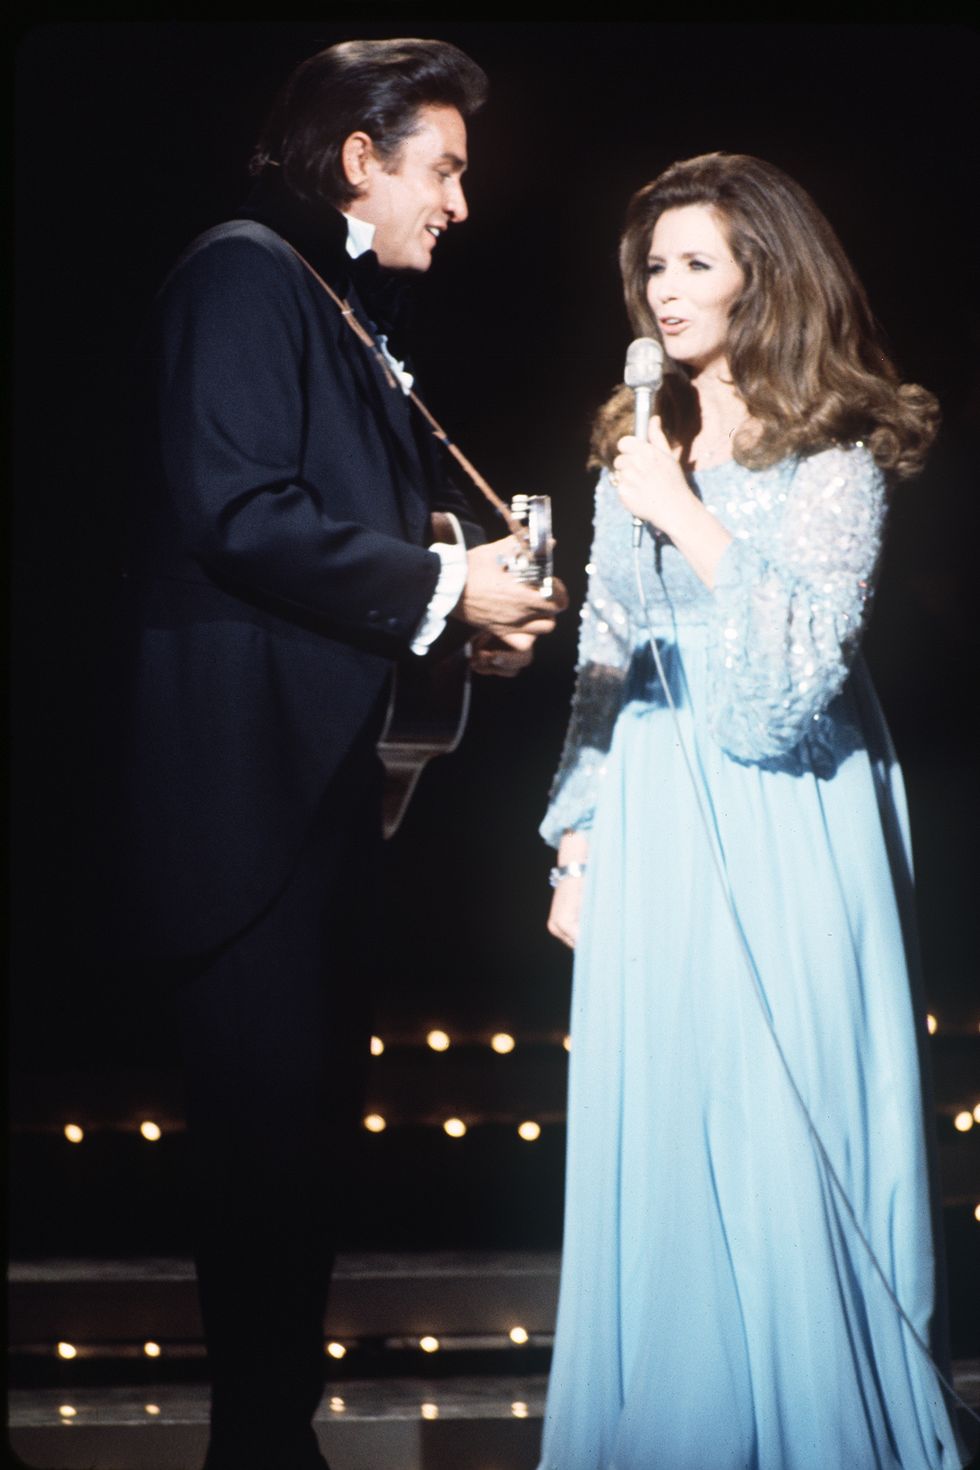 UNITED STATES - APRIL 10:  JOHNNY CASH - "The Johnny Cash Show" - 4/10/70, Johnny Cash and June Carter Cash at the Grand Ole Opry.,  (Photo by ABC Photo Archives/ABC via Getty Images)